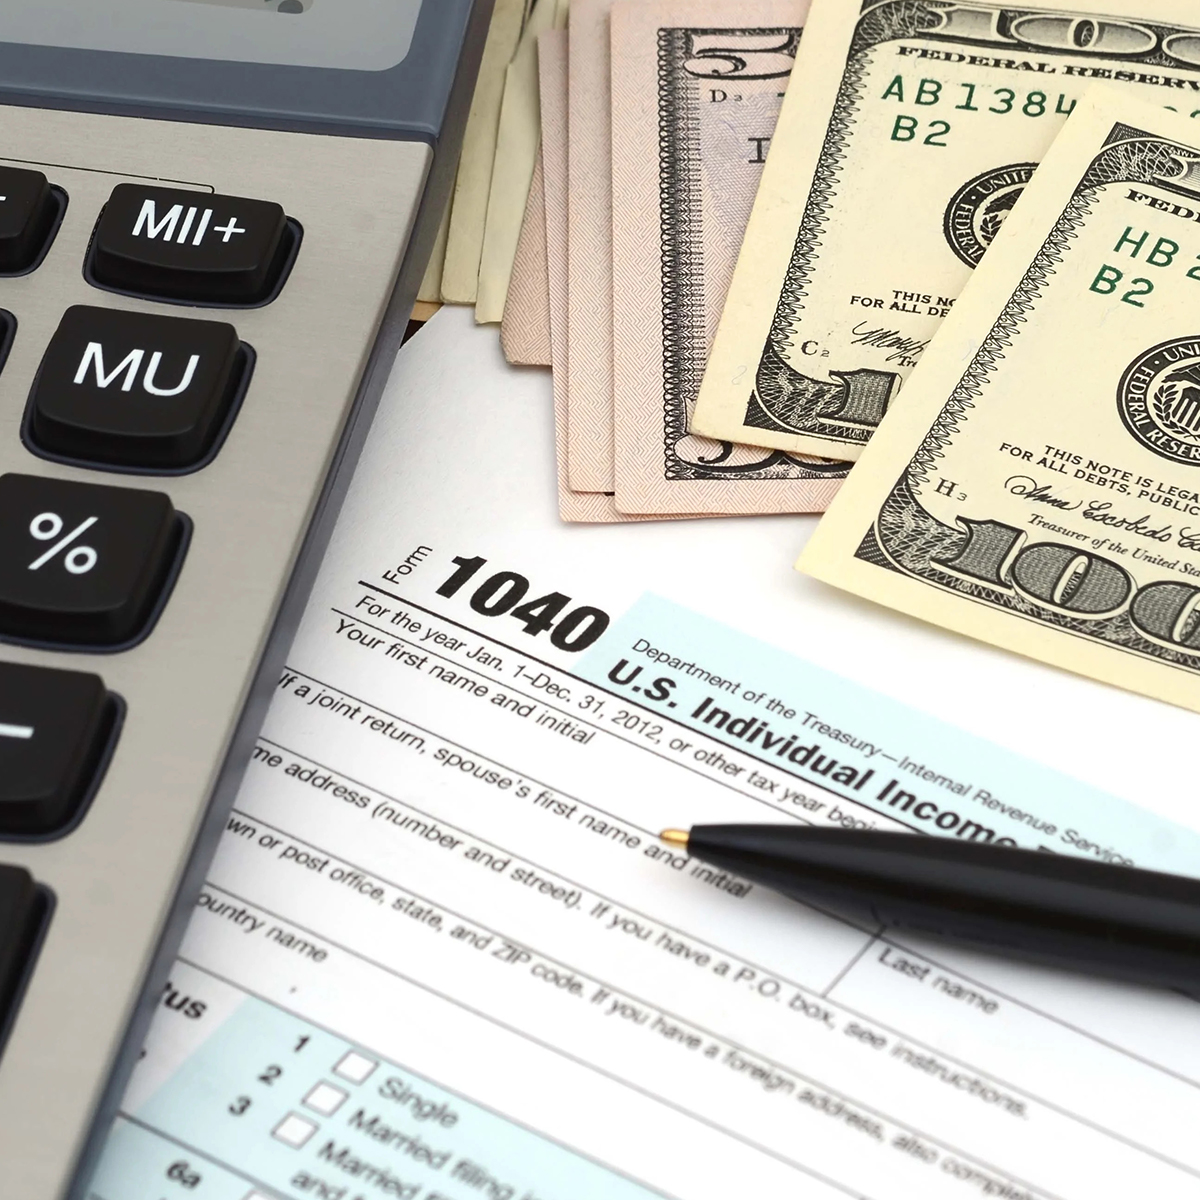 IRS Tax Withholding Estimator helps people get ready for the 2024 filing season; make sure withholding is right on 2023 paychecks